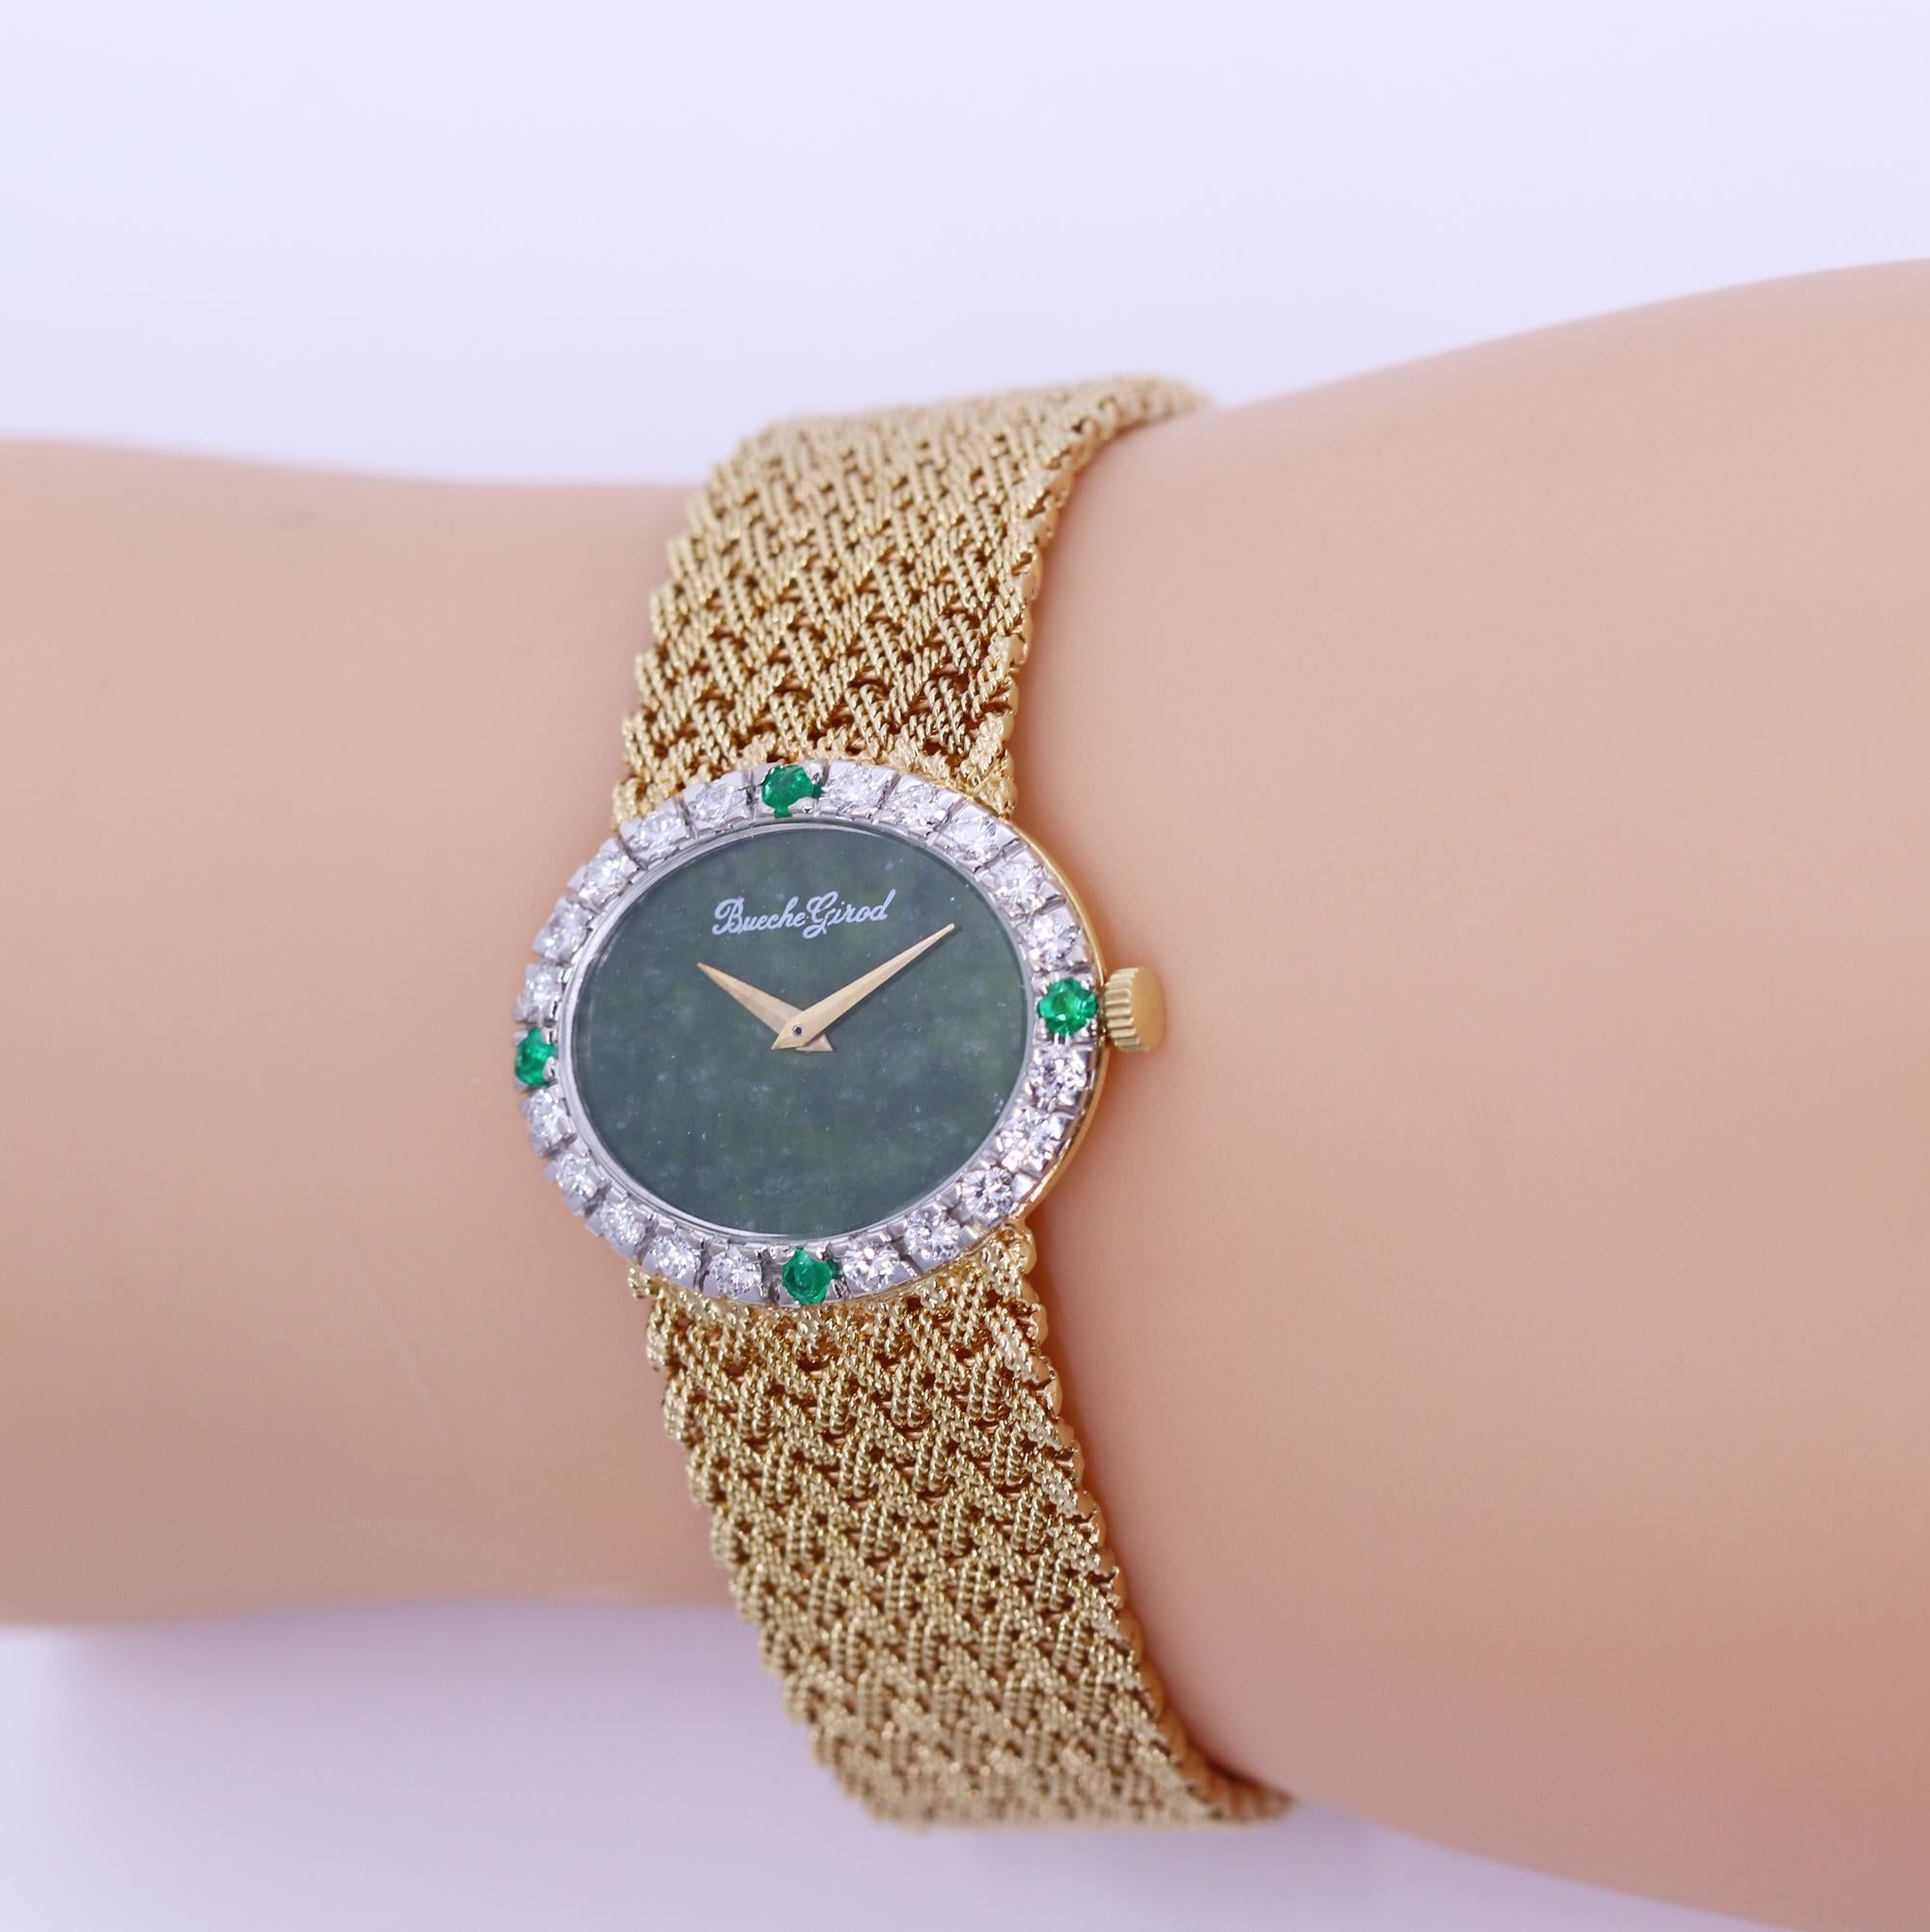 Brilliant Cut Ladies Gold Beuche Girod Watch with Diamond and Emerald Bezel and Jade Dial